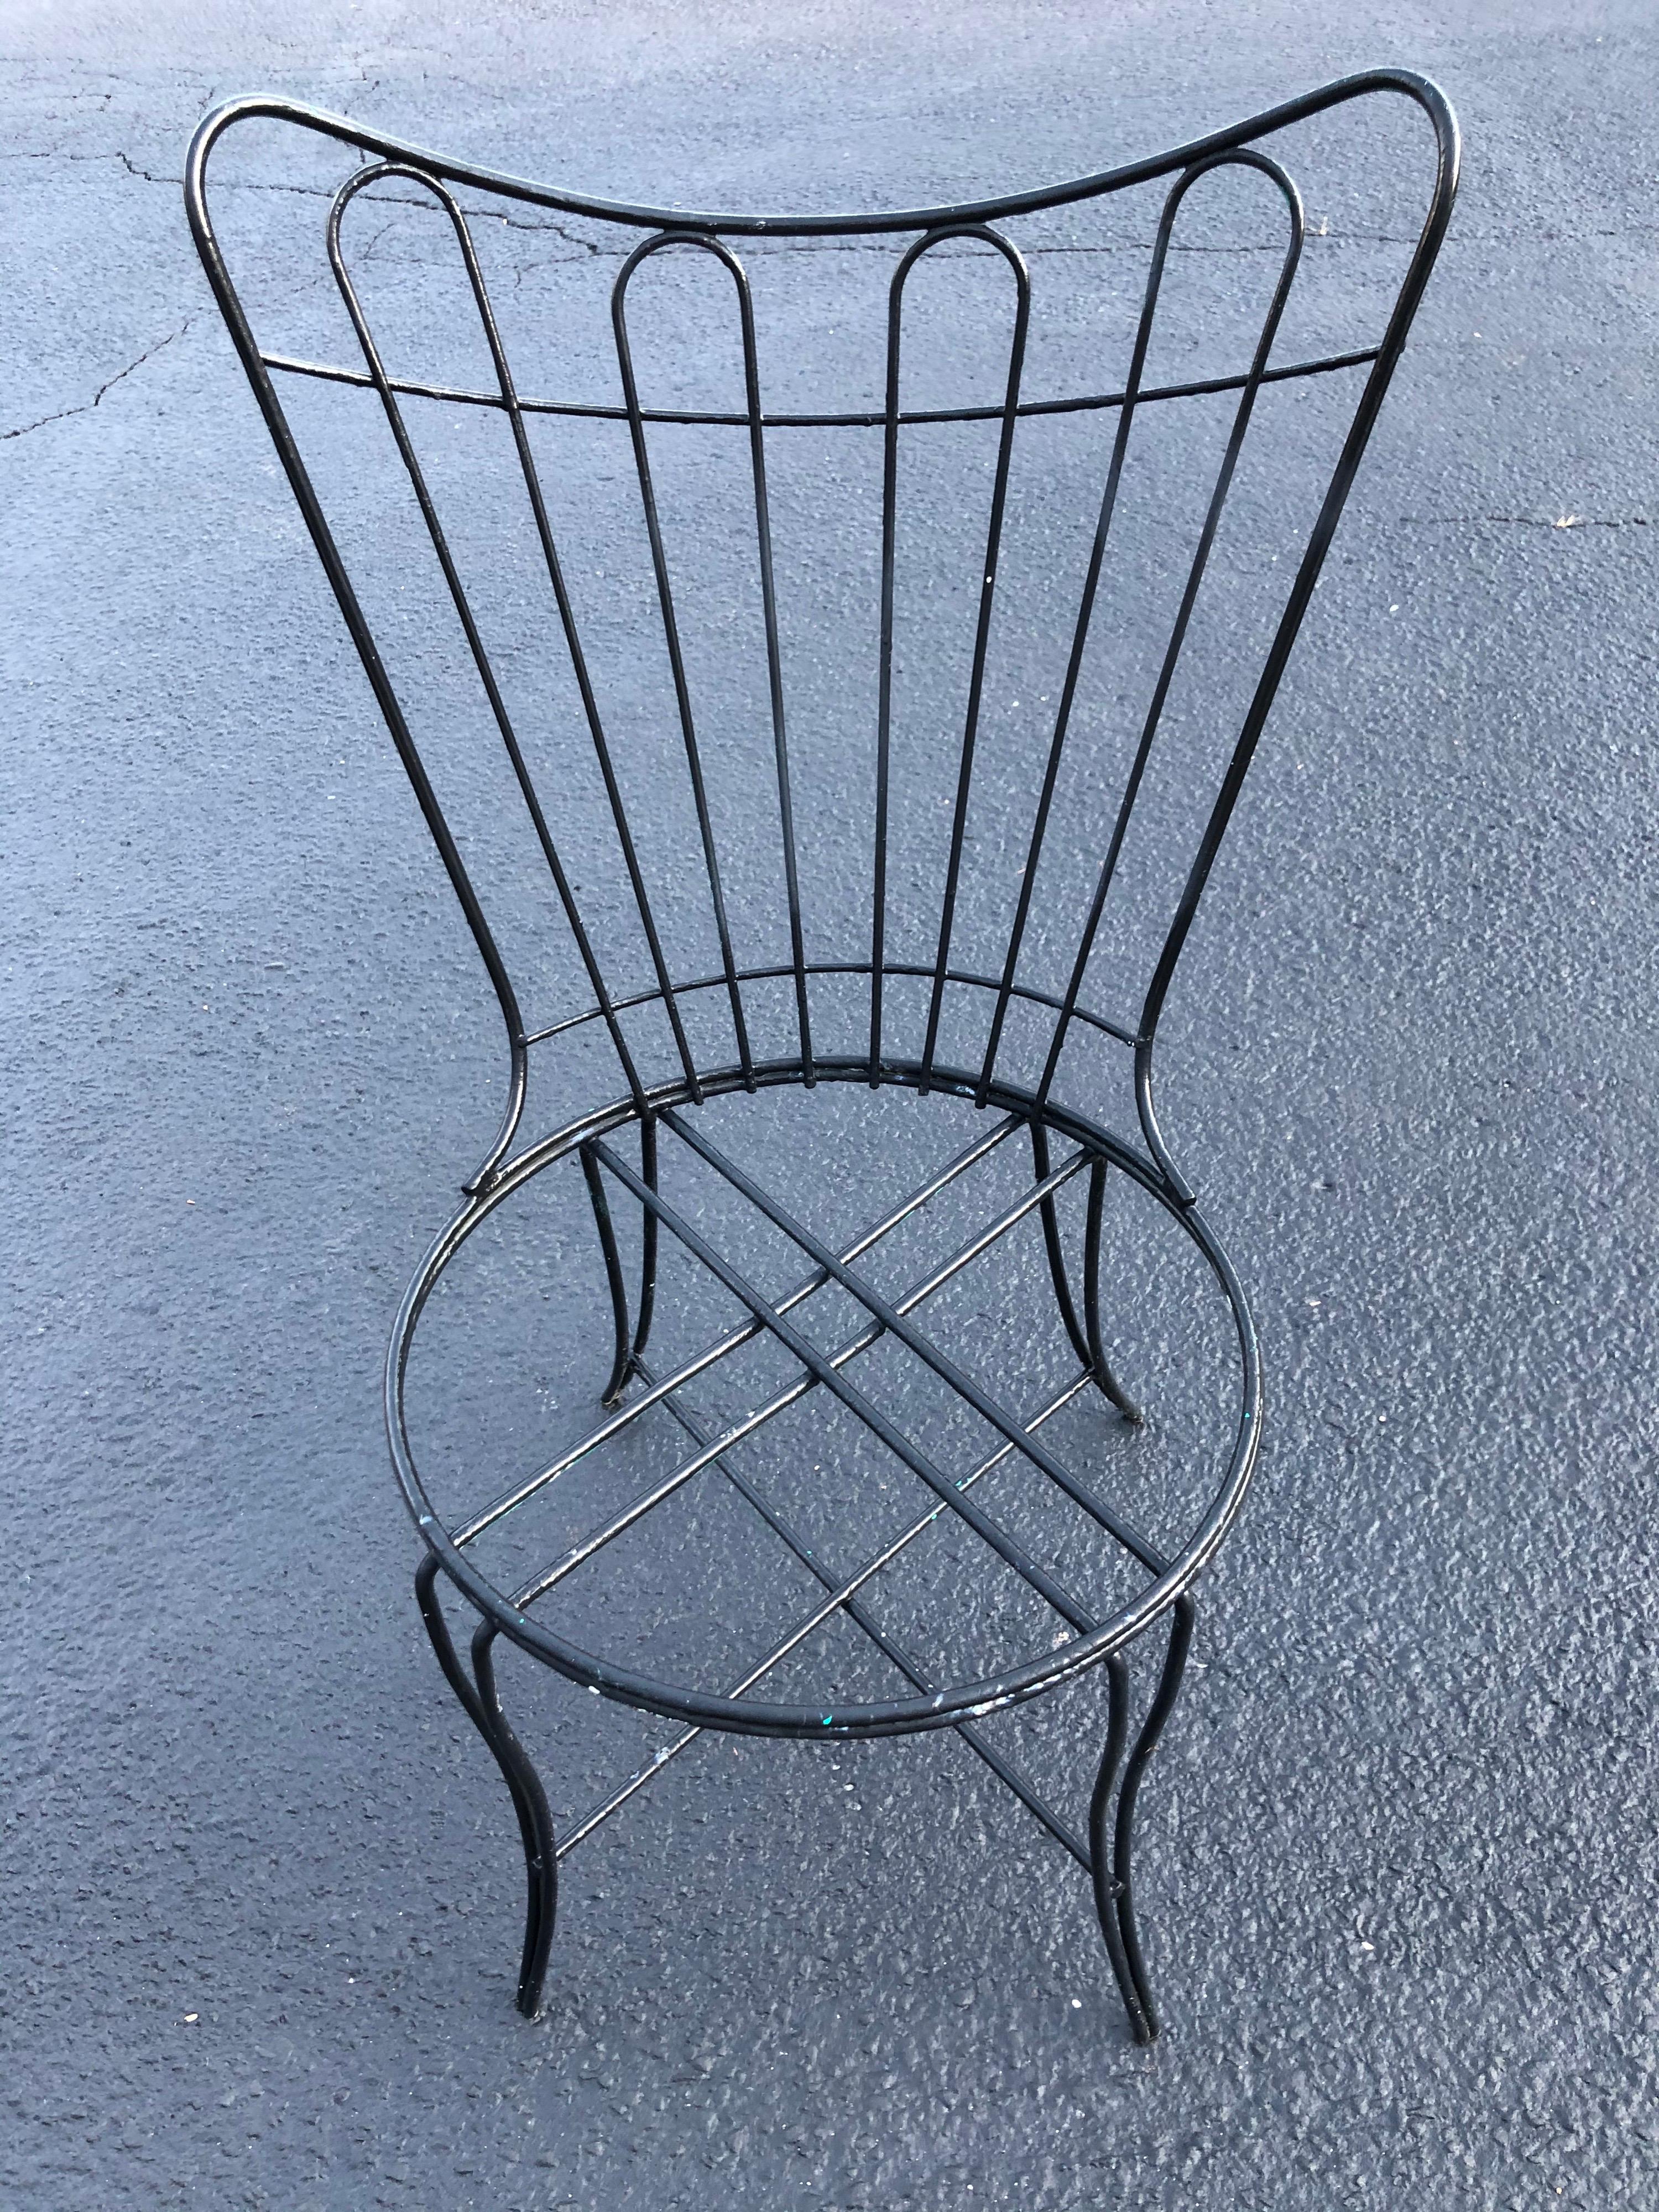 Painted Mid-Century Modern “Homecrest” Outdoor Patio Chair